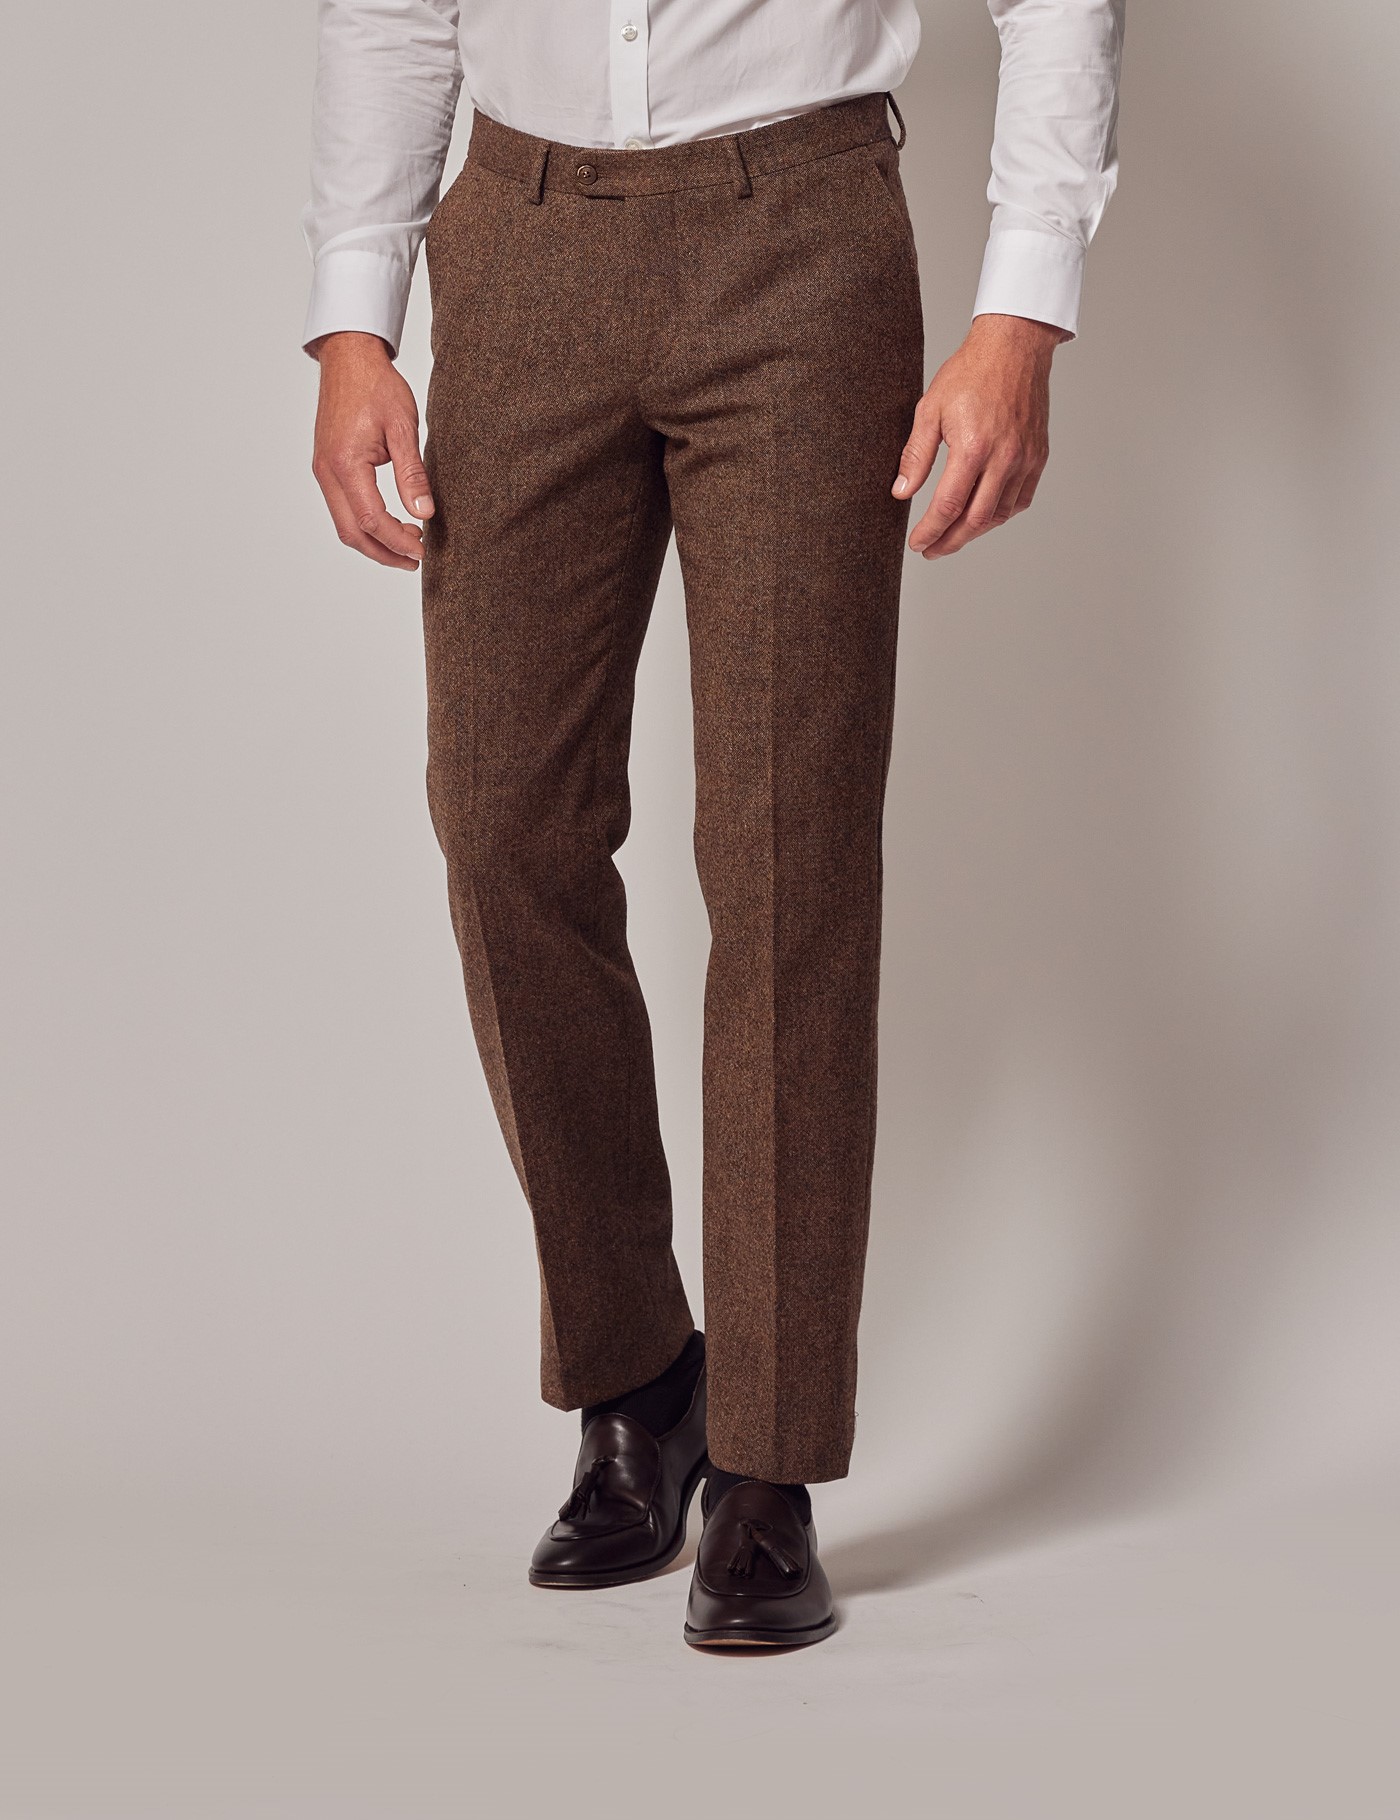 Men's Country Style Trousers  British Tweed & Cotton Jeans US